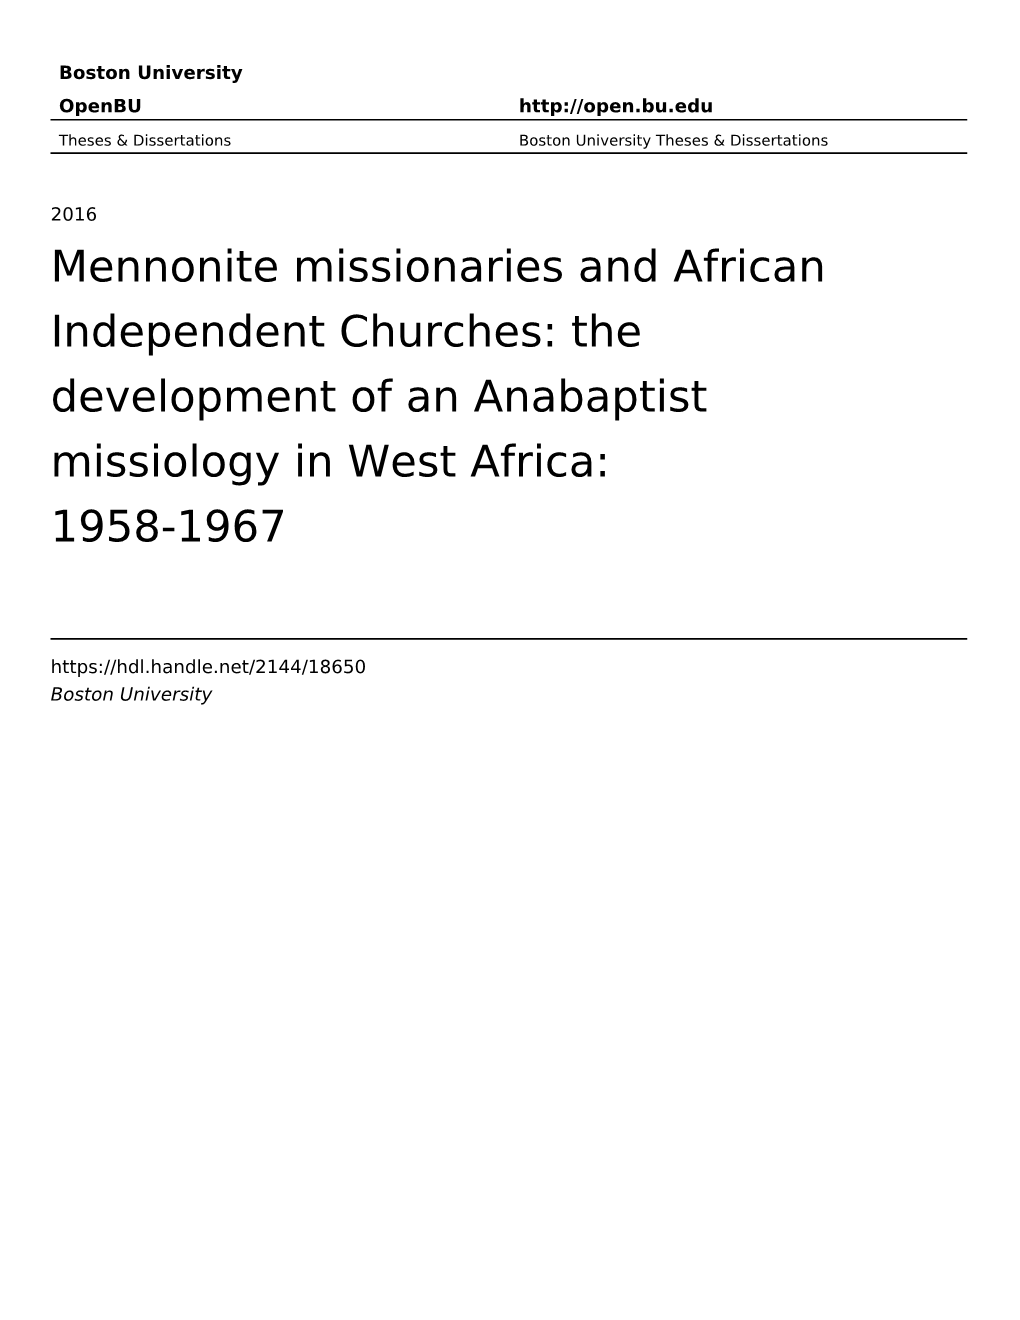 Mennonite Missionaries and African Independent Churches: the Development of an Anabaptist Missiology in West Africa: 1958-1967